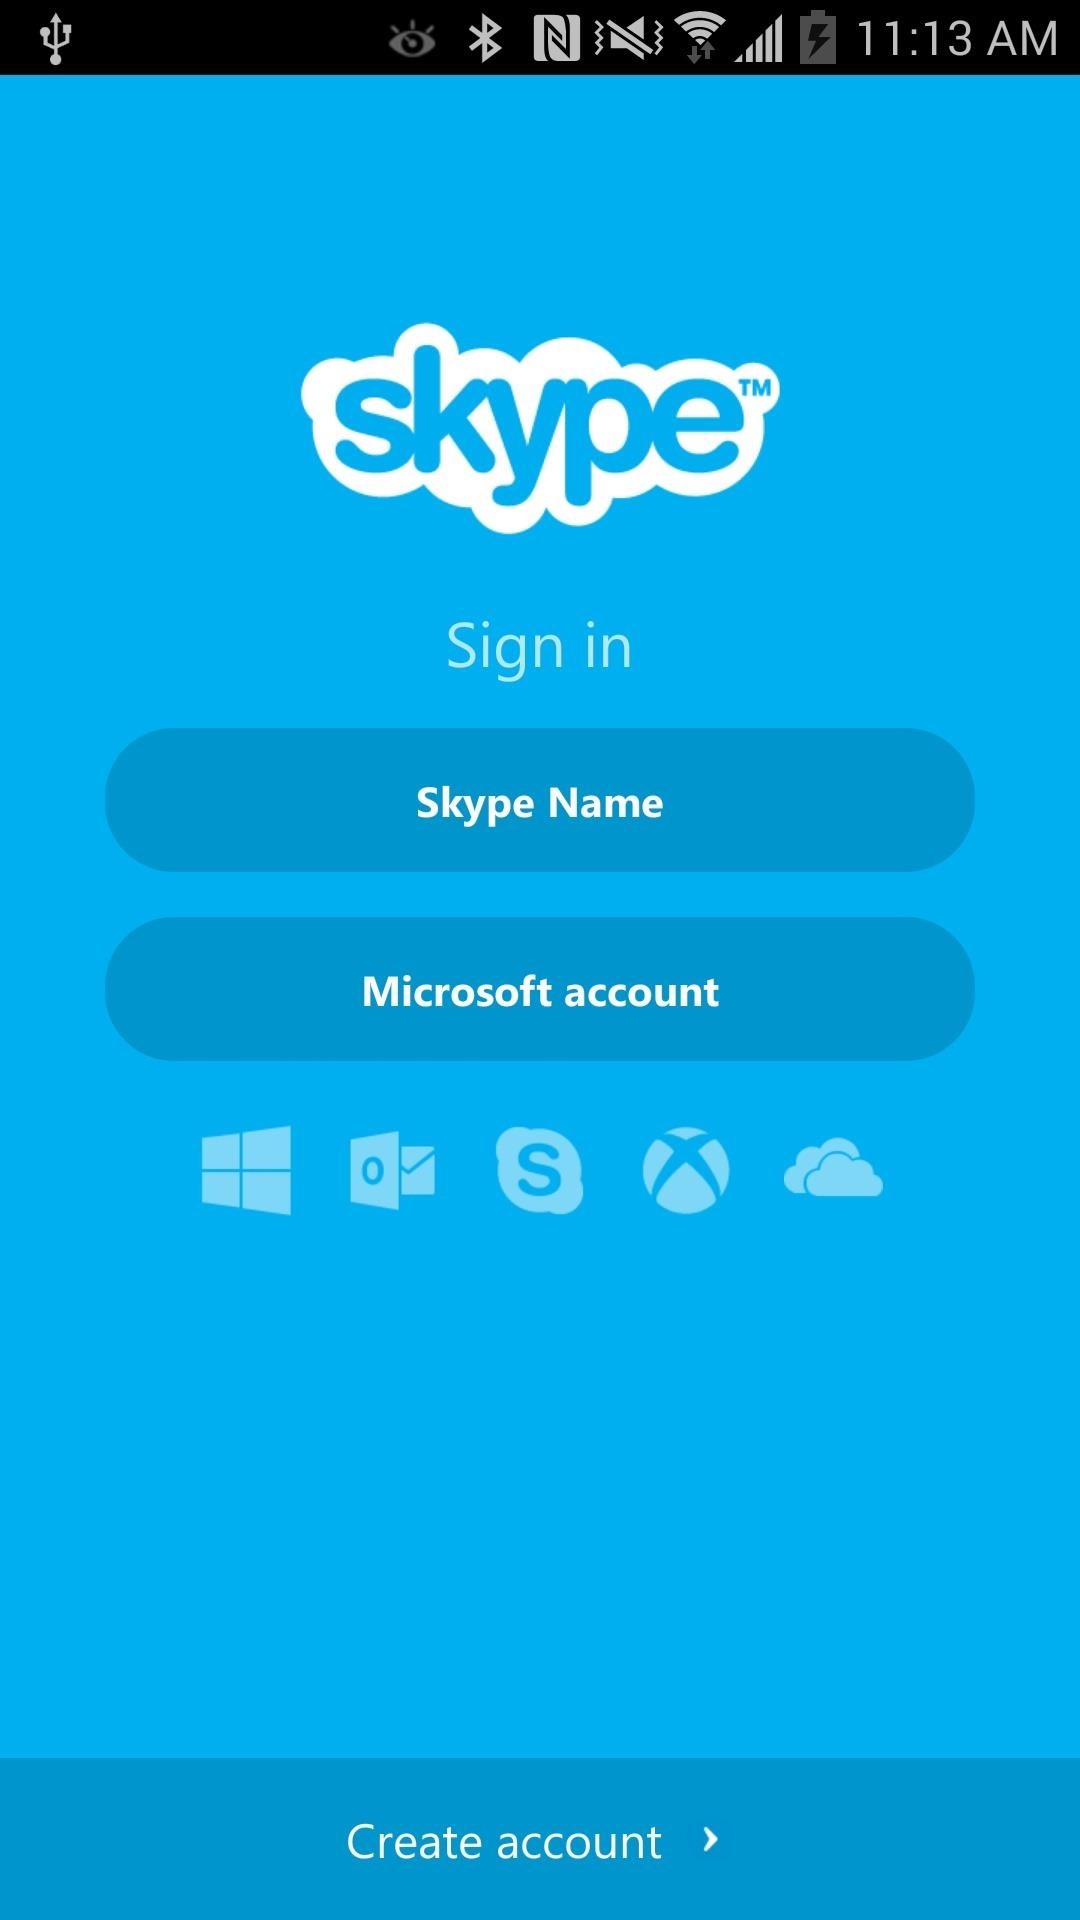 How to Fix & Improve the Buggy Skype App for Android on Your Galaxy Note 3